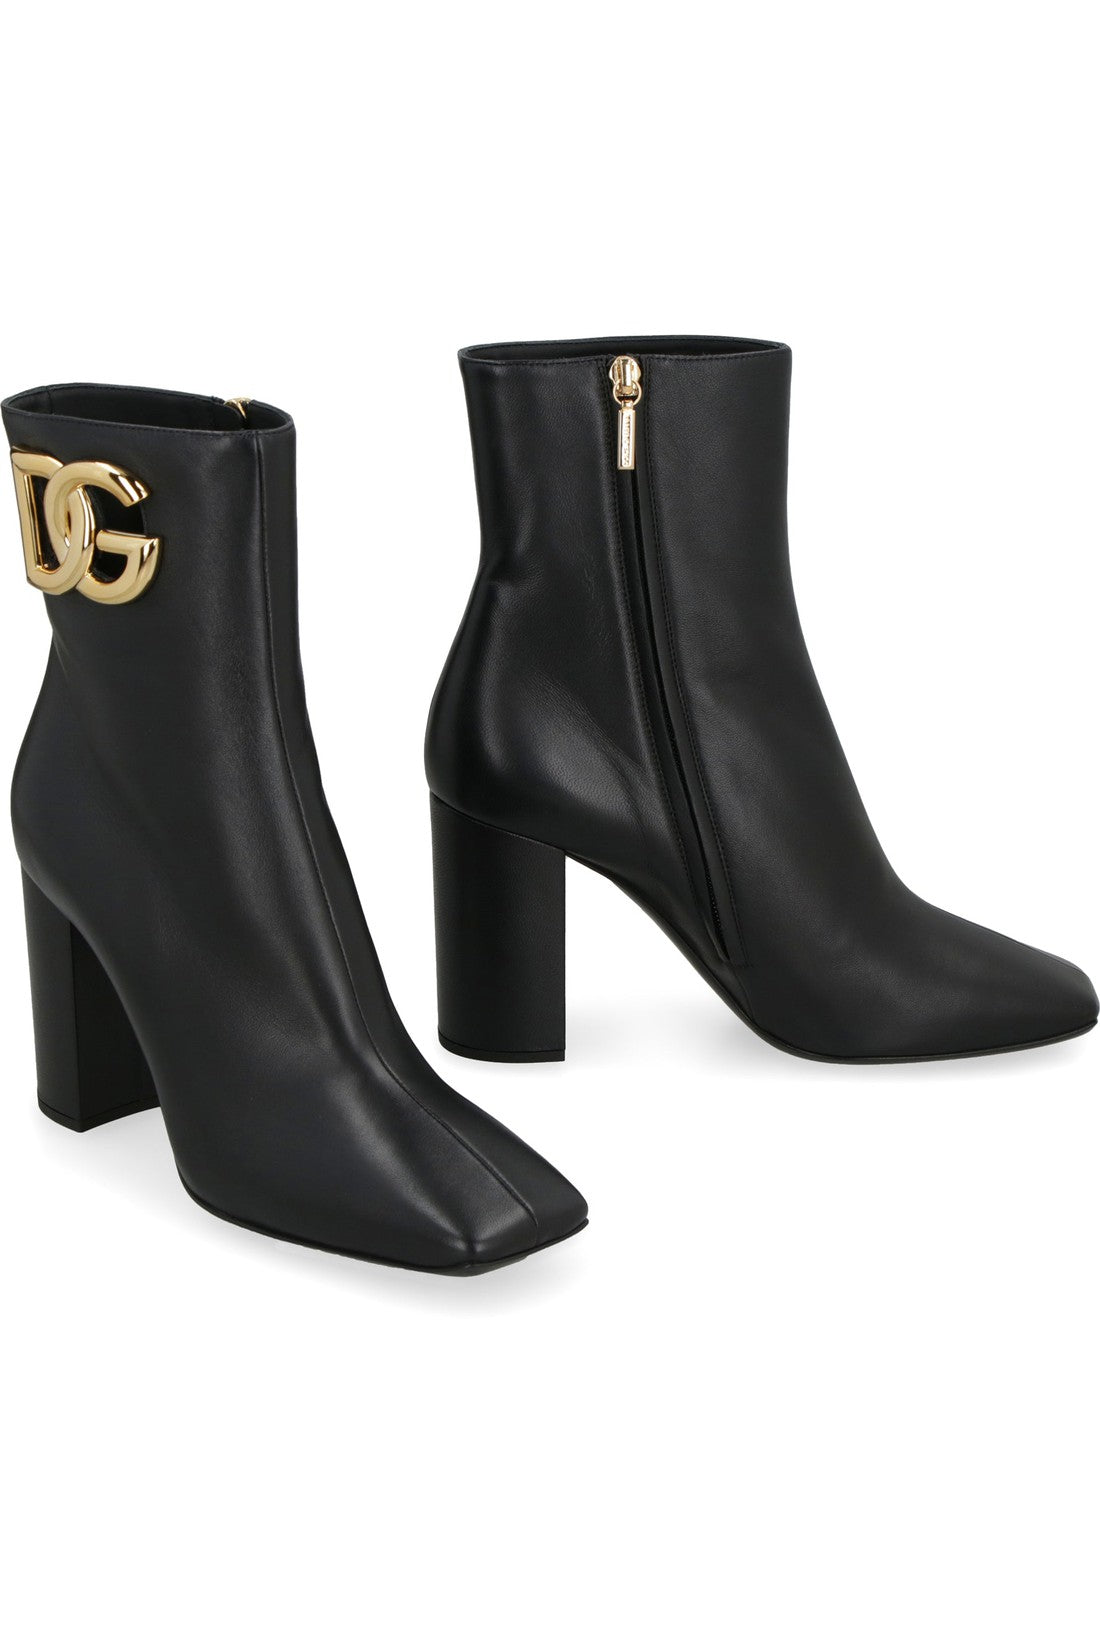 Dolce & Gabbana-OUTLET-SALE-Jackie nappa ankle boots-ARCHIVIST